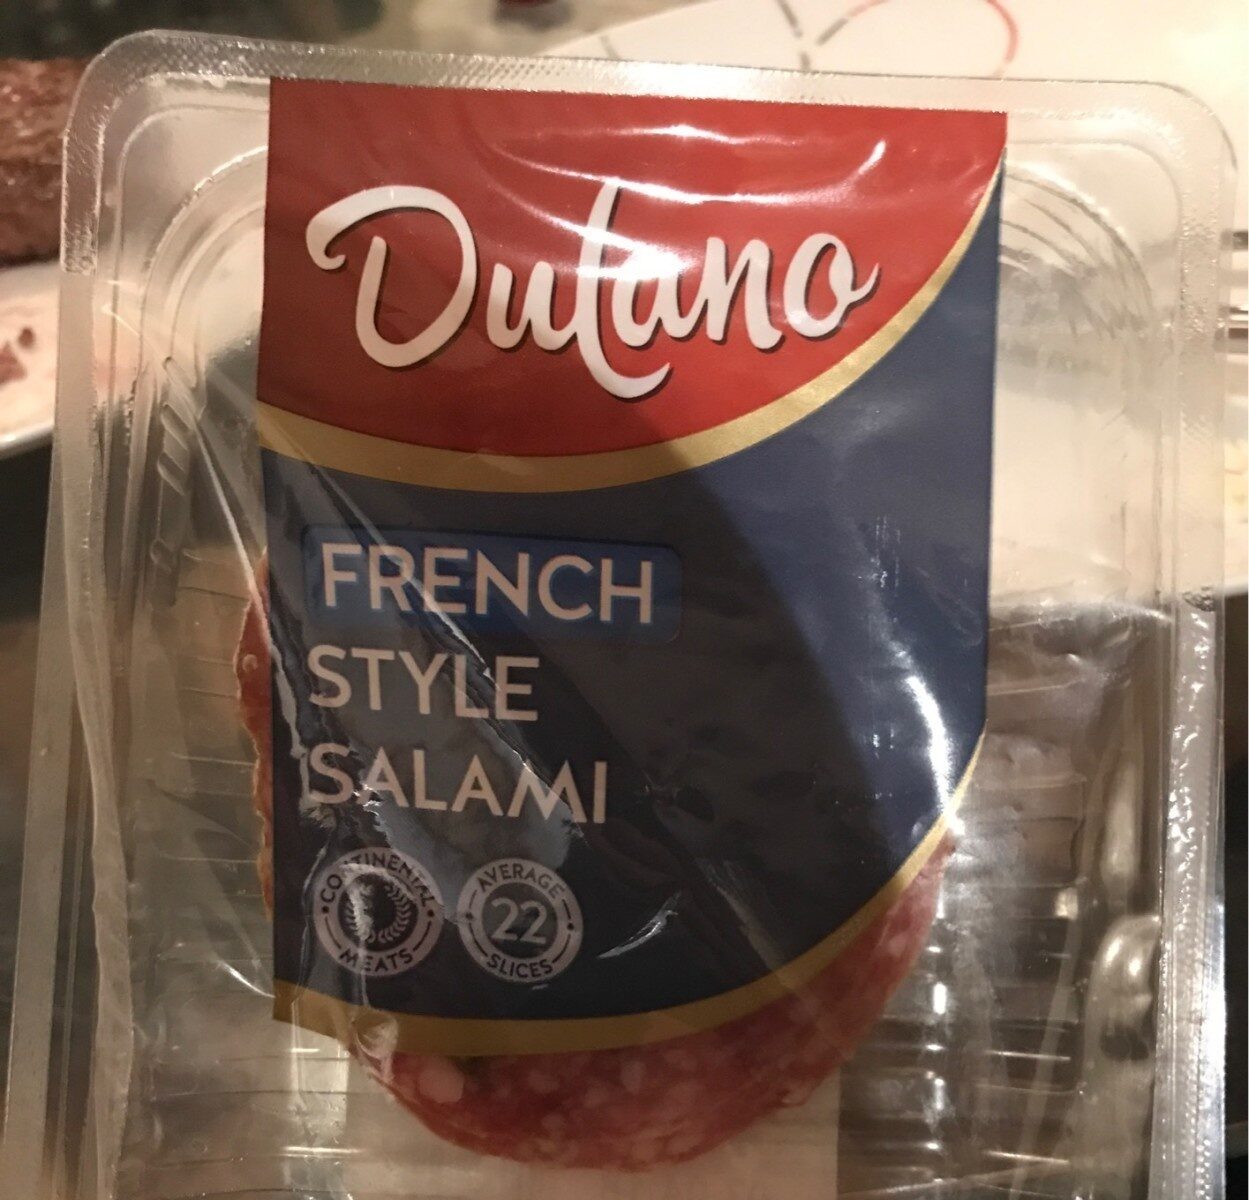 french style salami - Product - de